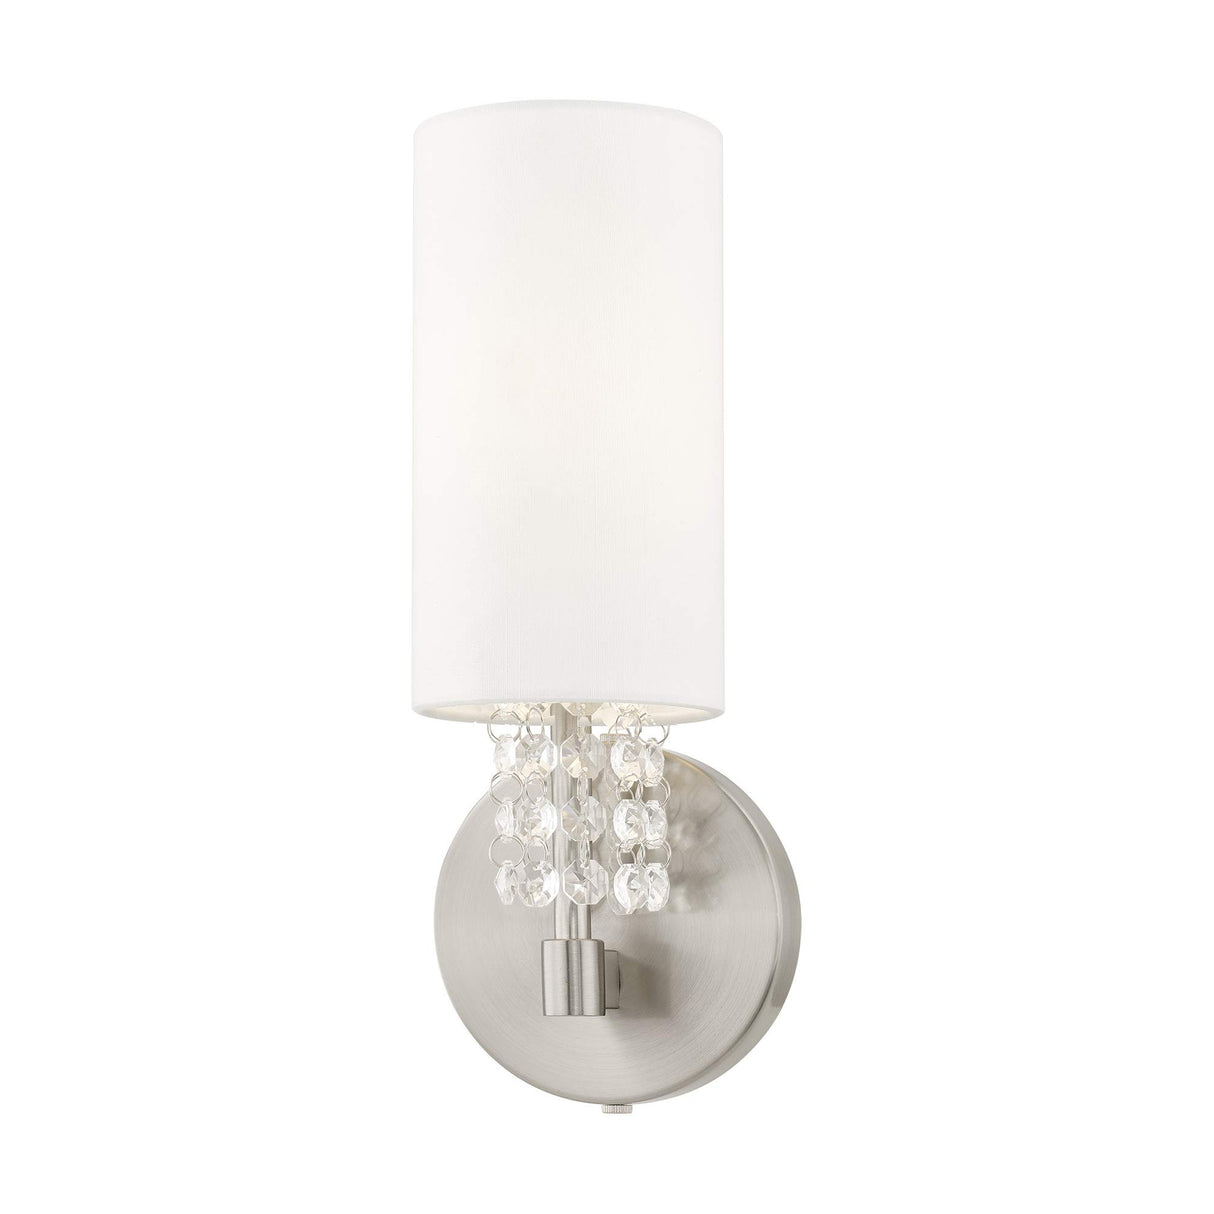 Livex 51030-91 Transitional One Light Wall Sconce from Carlisle Collection in Pwt, Nckl, B/S, Slvr. Finish, Brushed Nickel